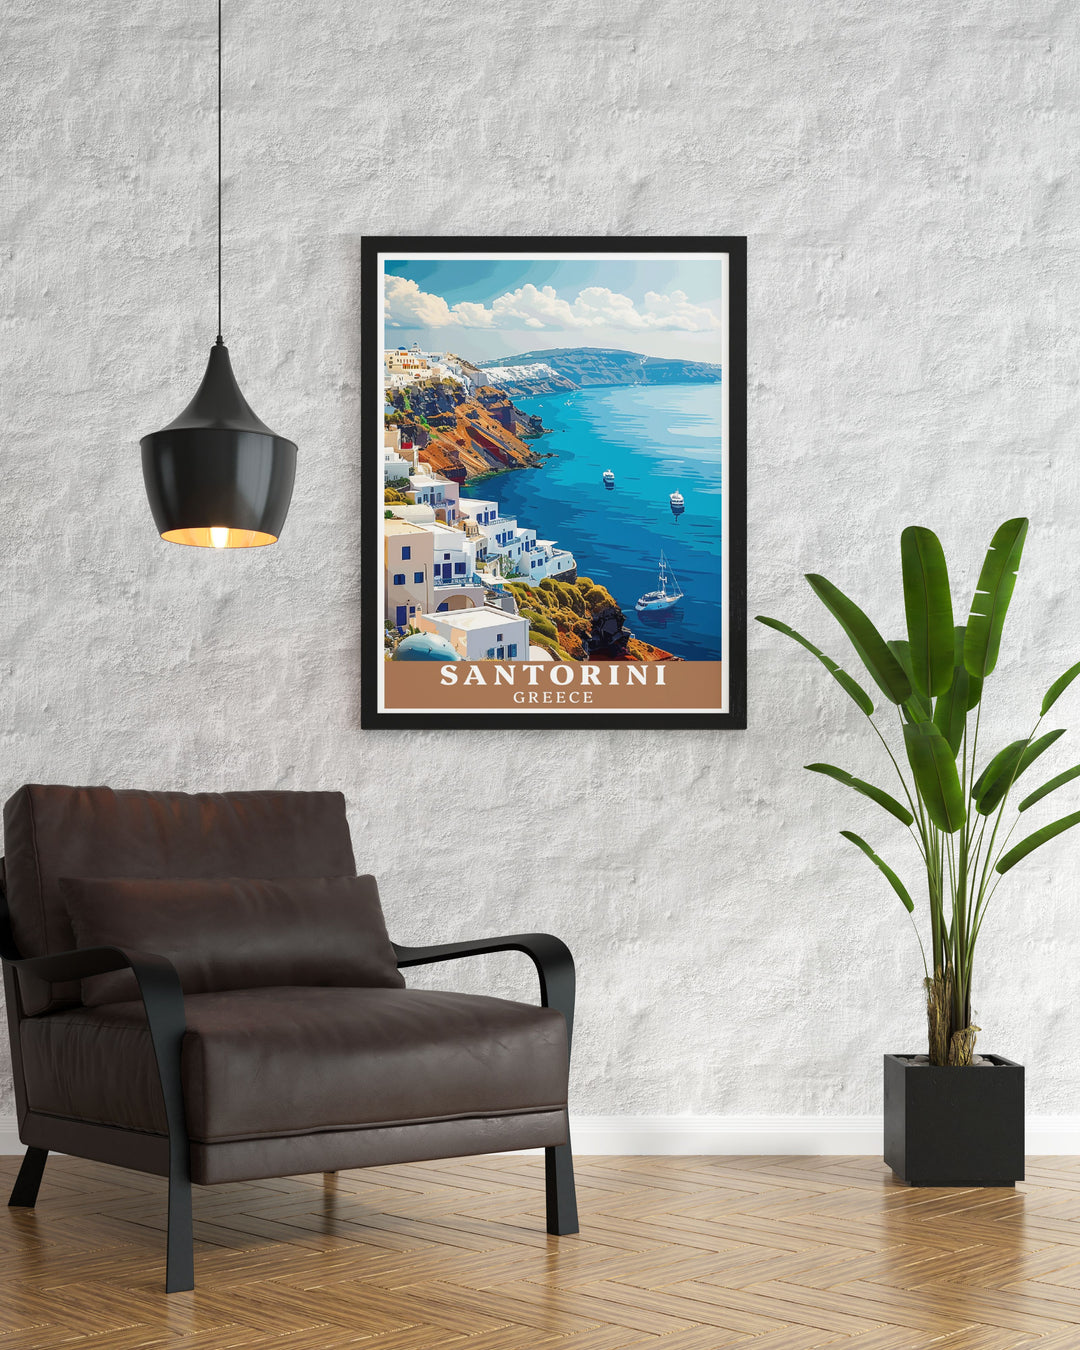 Santorini Wall Art of Fira, showcasing its stunning views, blue domed churches, and rich history. Ideal for adding a touch of Mediterranean charm to your living space.